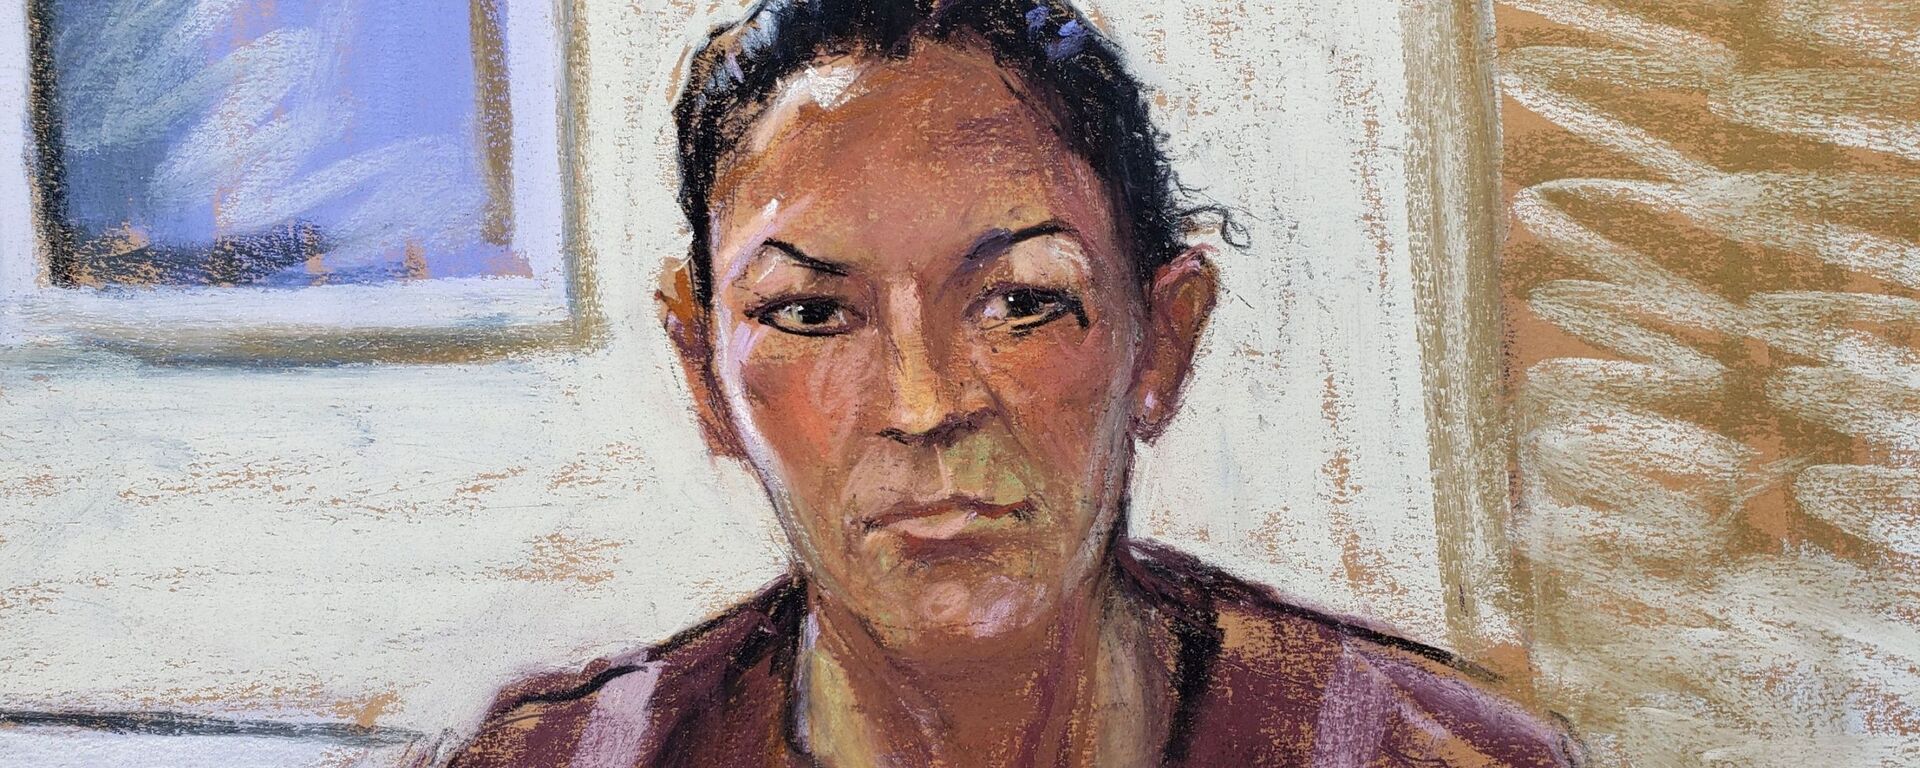 Ghislaine Maxwell appears via video link during her arraignment hearing where she was denied bail for her role aiding Jeffrey Epstein to recruit and eventually abuse of minor girls, in Manhattan Federal Court, in the Manhattan borough of New York City, New York, U.S. July 14, 2020 in this courtroom sketch - Sputnik International, 1920, 13.11.2021